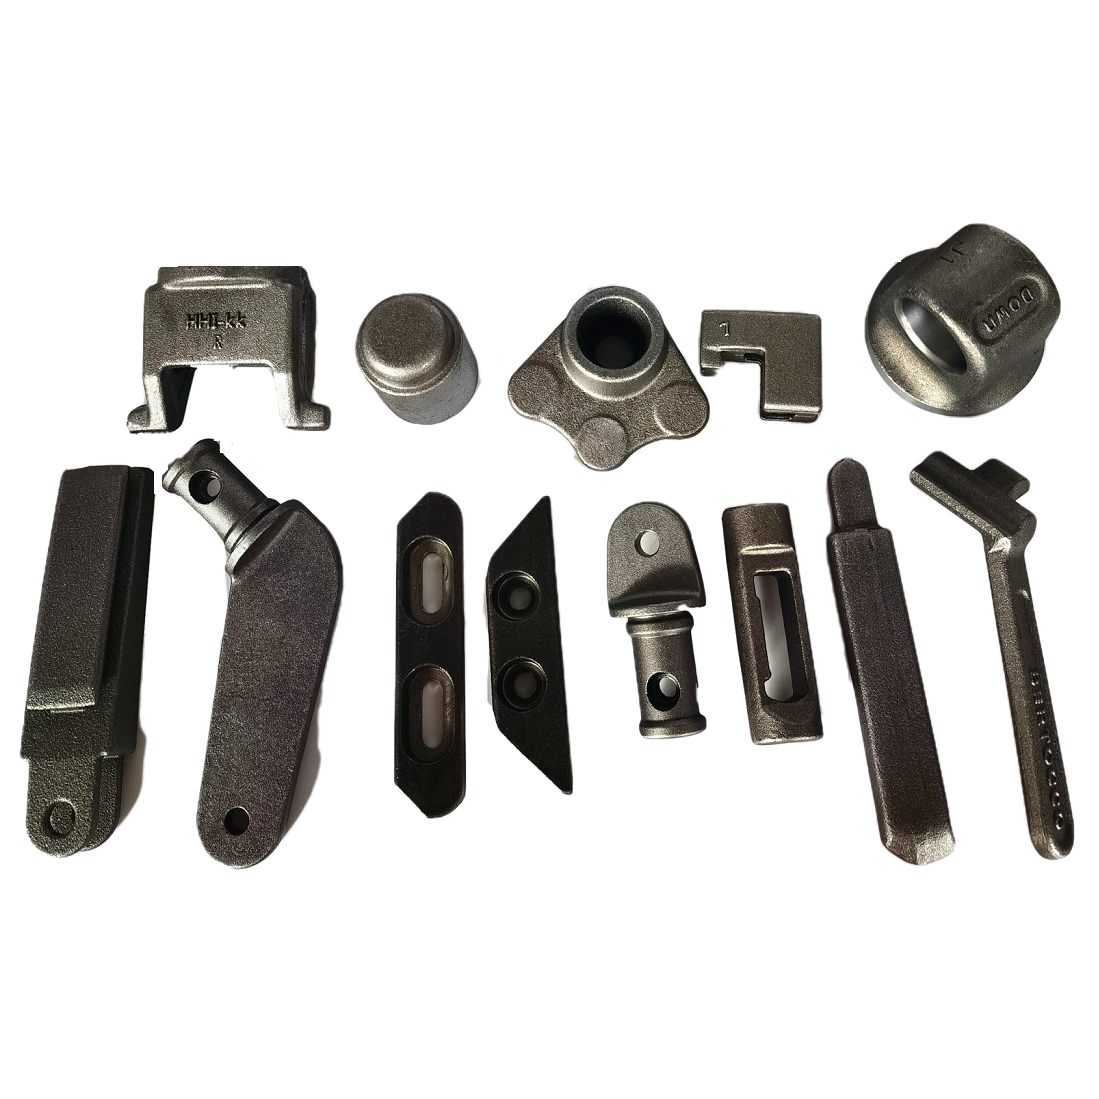 Forged lever metalworking services